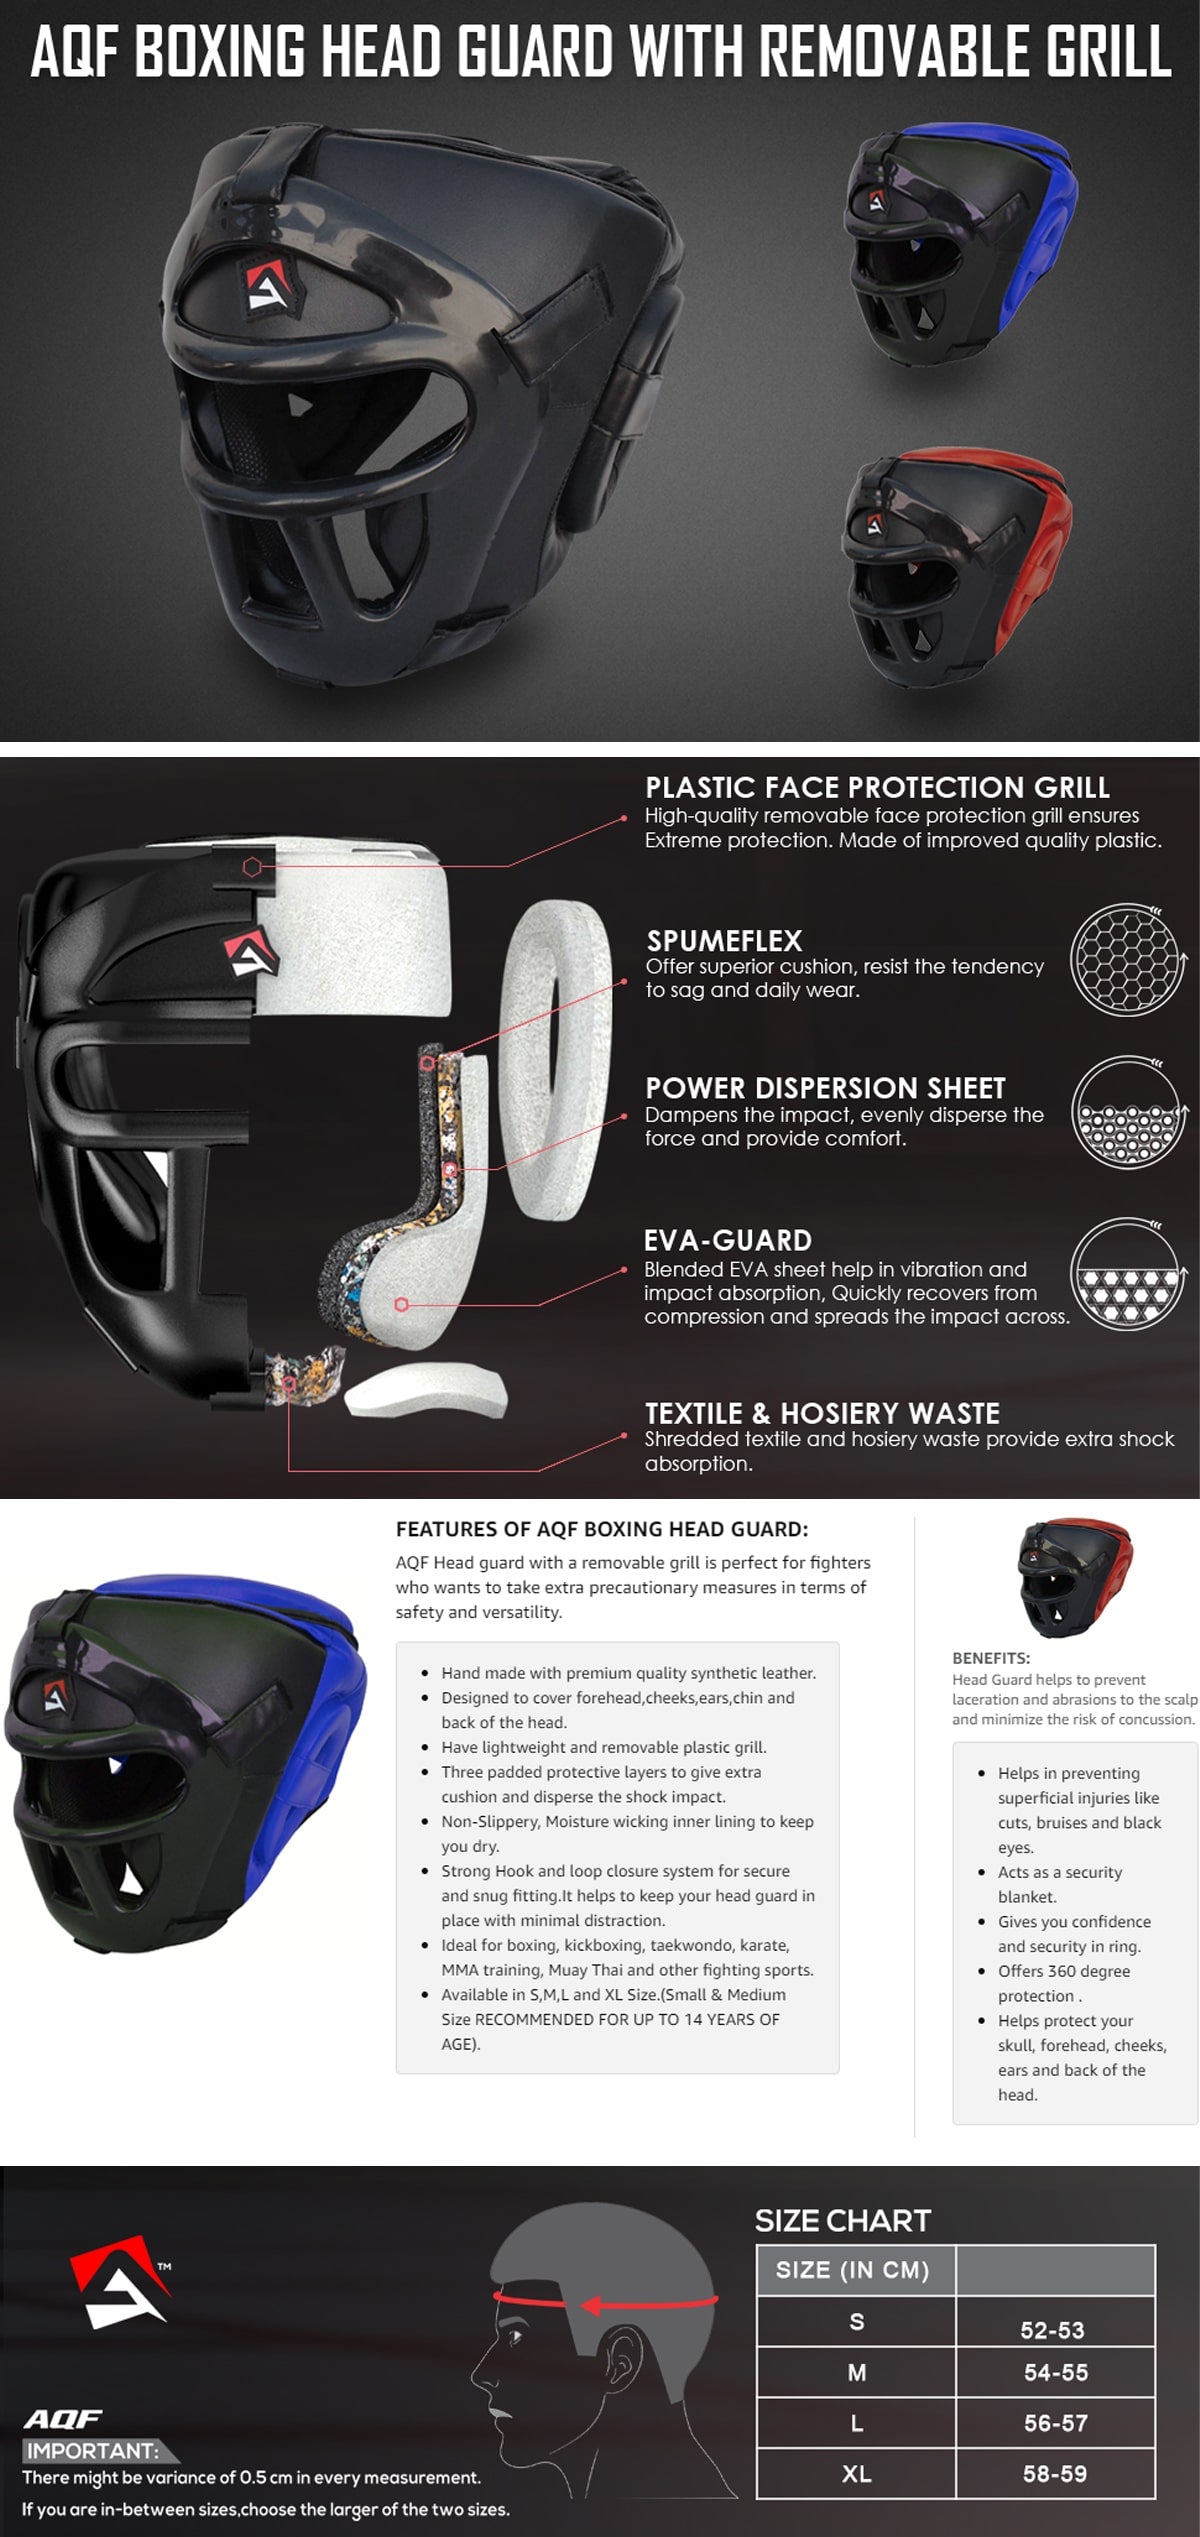 Features of AQF Boxing Head Gear